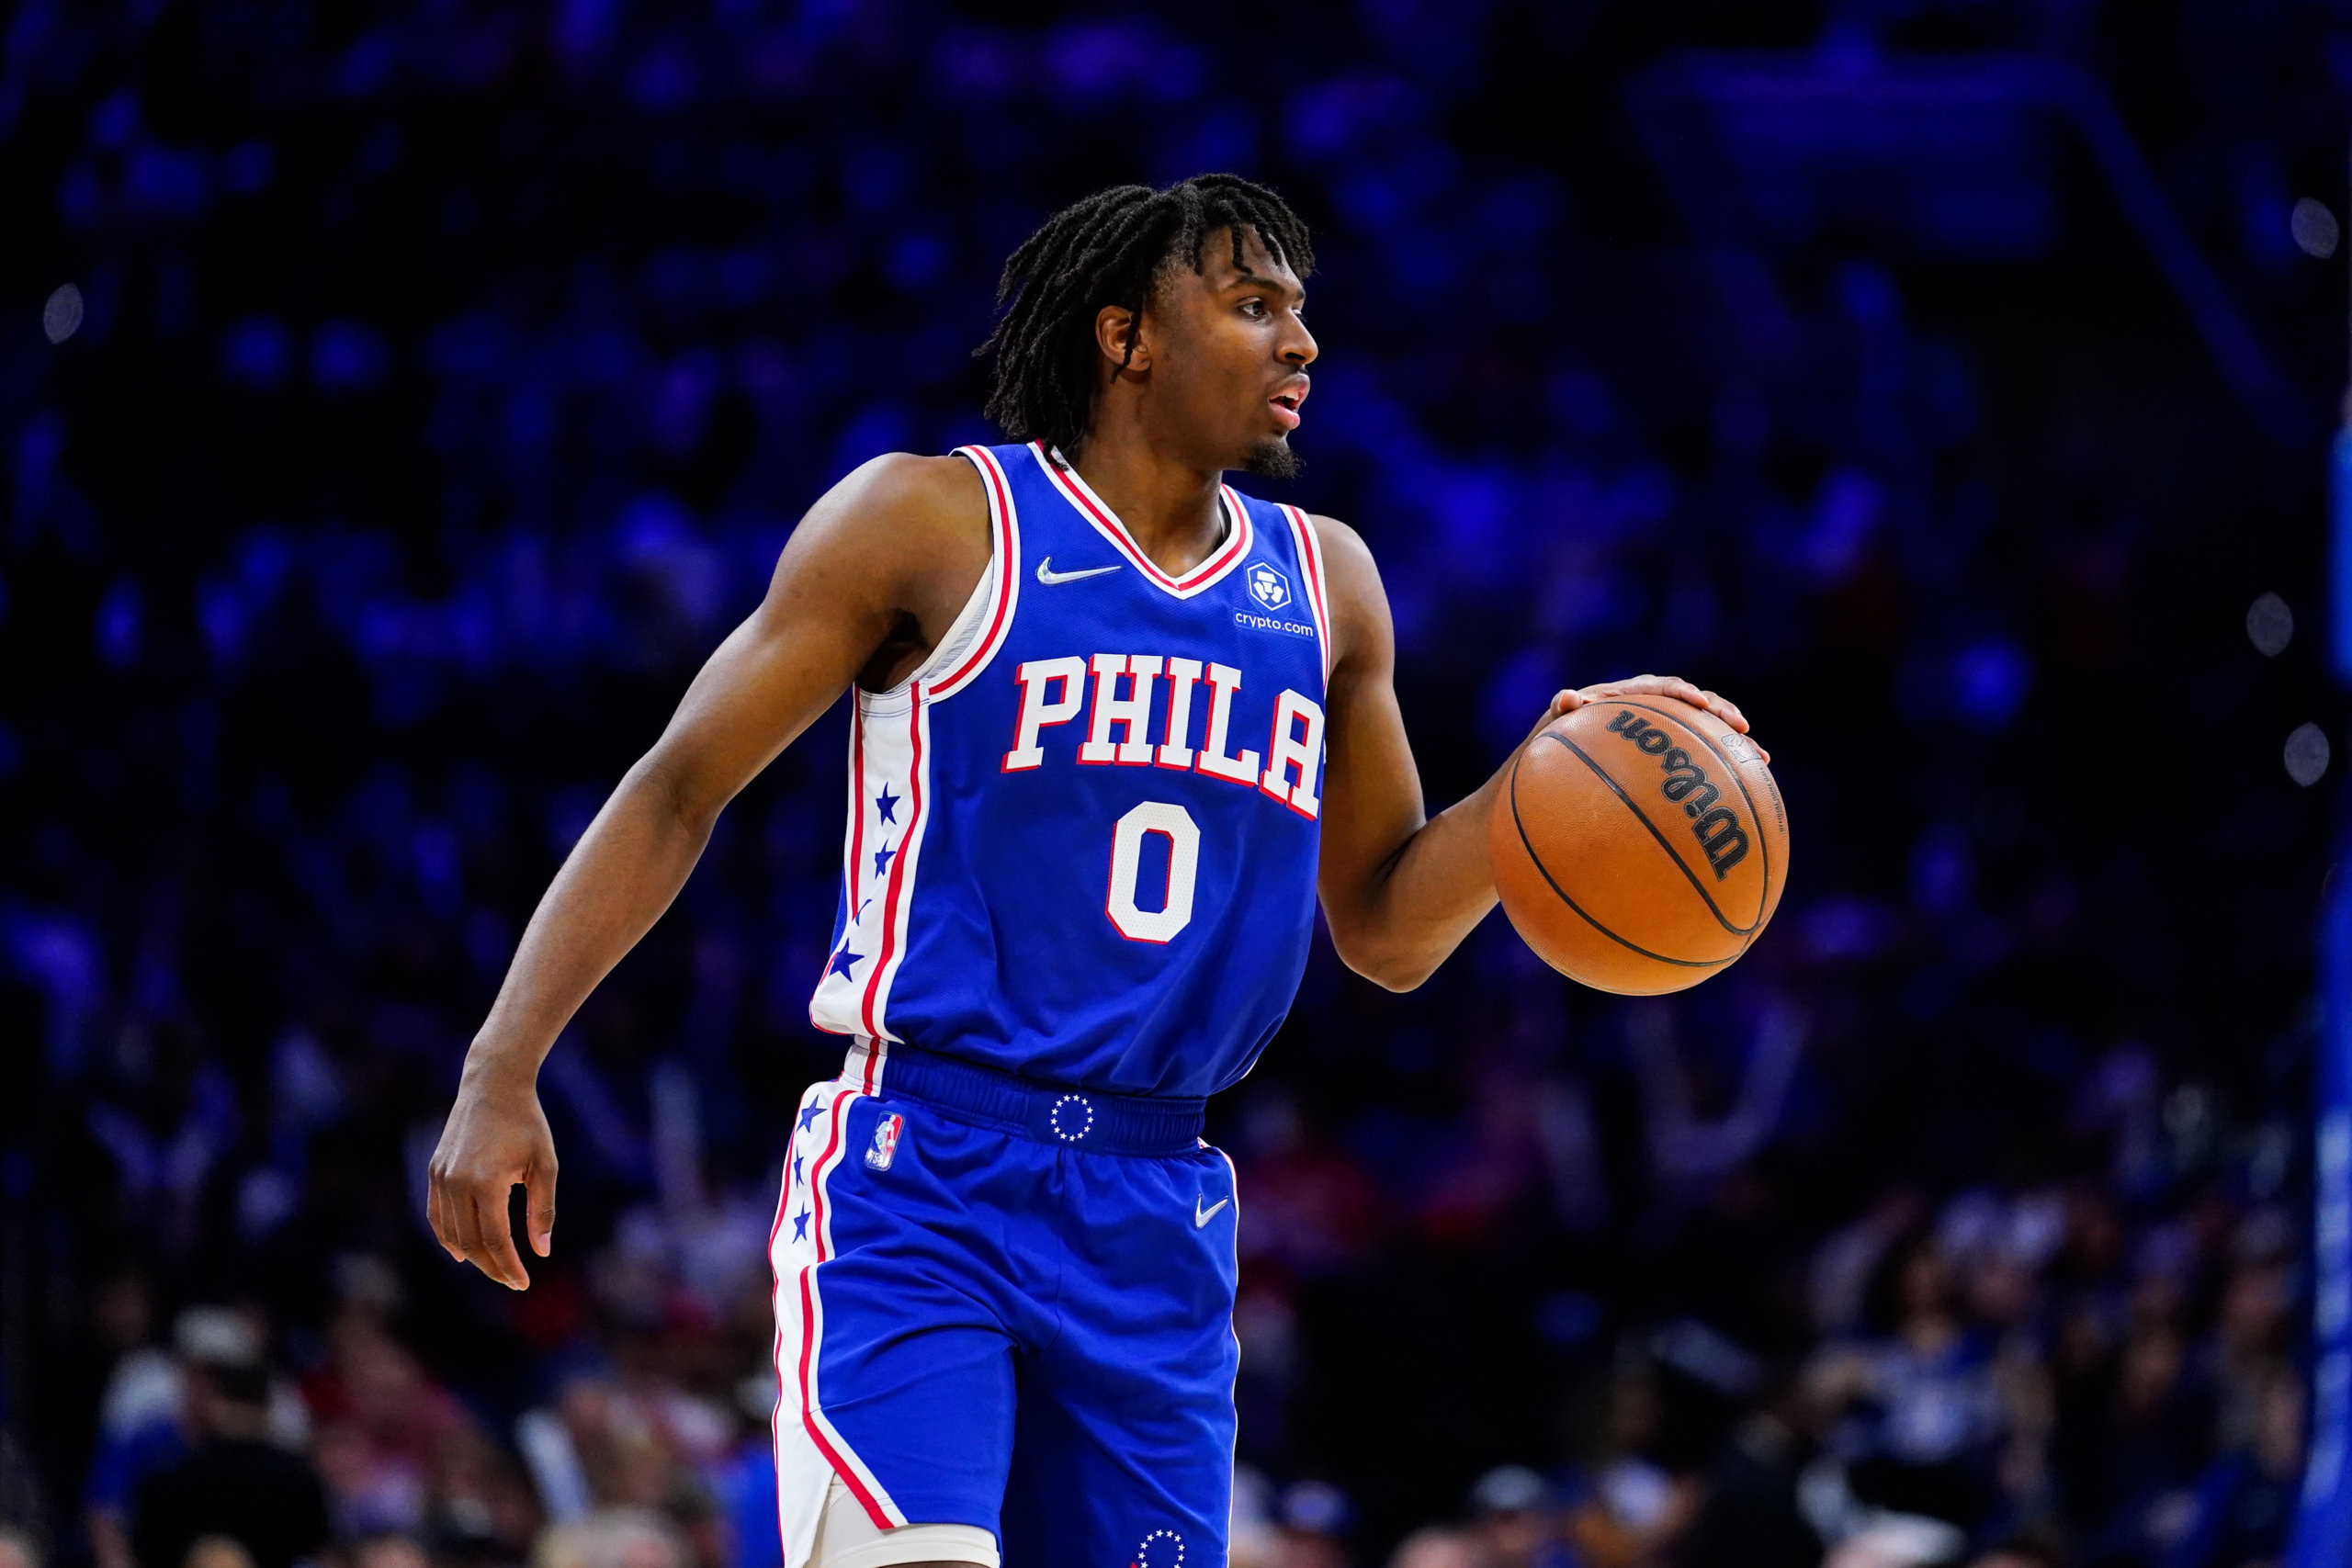 Stream Philadelphia 76ers Trading Card Tyrese Maxey Shirt by